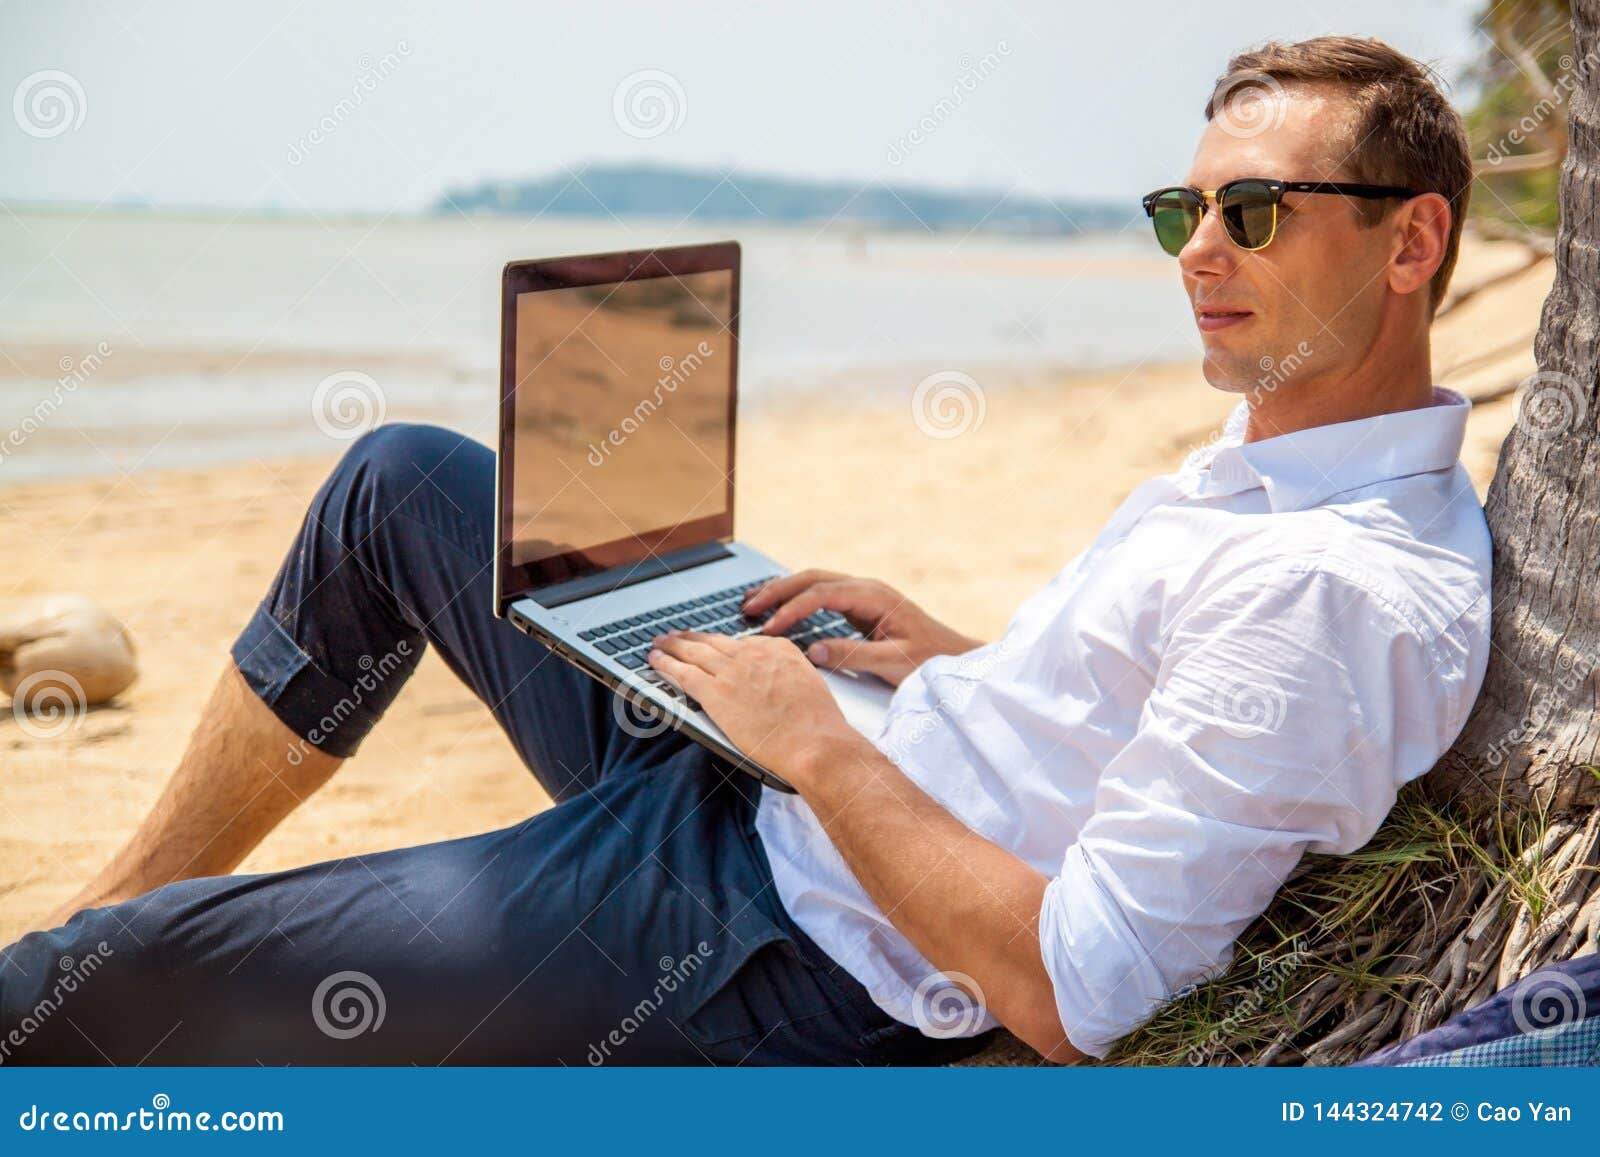 Telecommuting, Businessman Relaxing on the Beach with Laptop and Palm ...